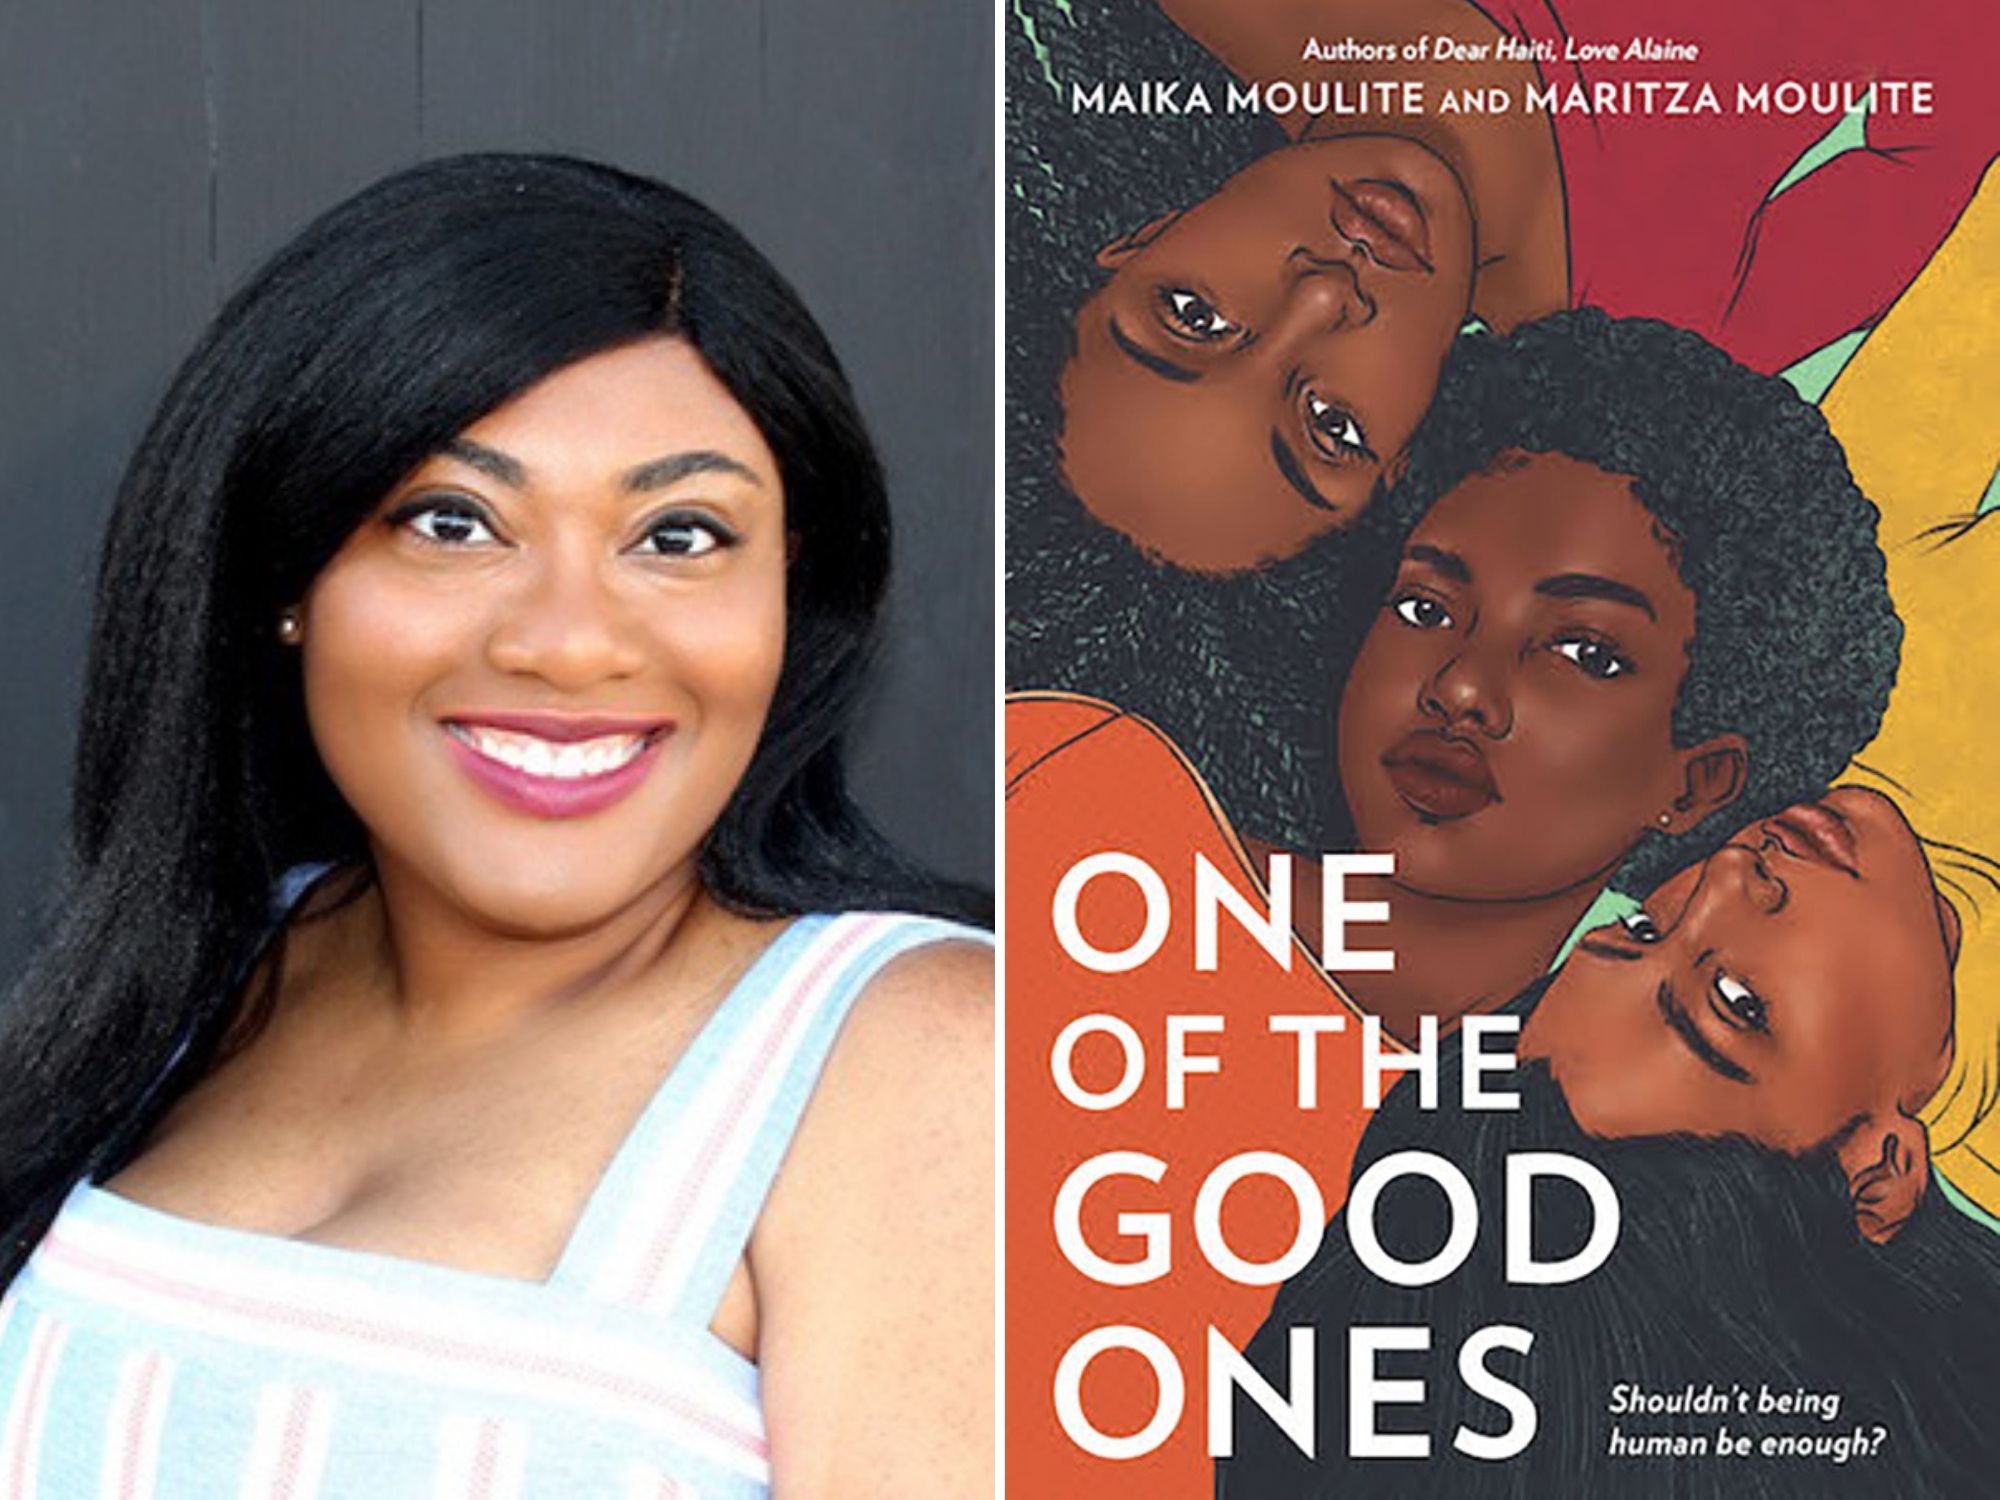 Maritza Moulite headshot on left, book cover for her book, One of the Good Ones, on the right.